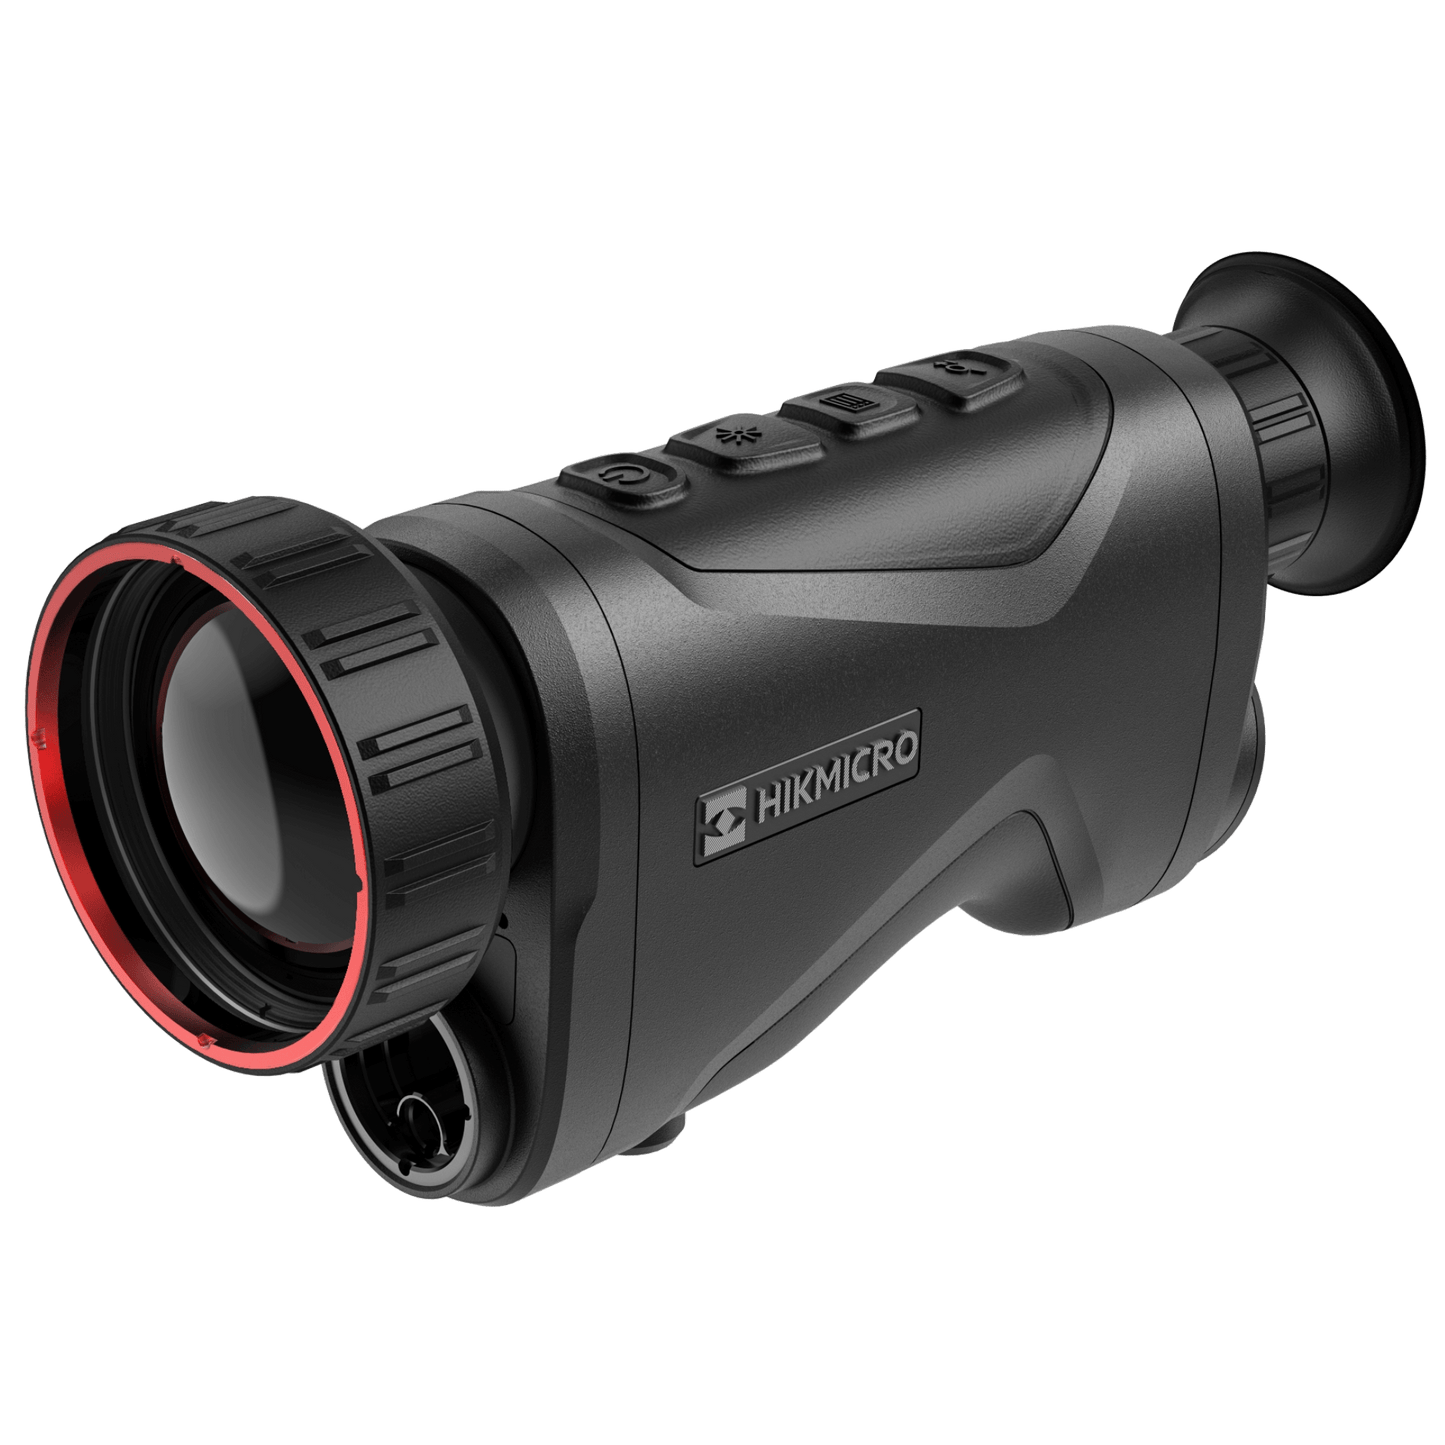 Front view of the HikMicro Condor CQ50L, a leading thermal monocular with rangefinder, ideal for security, surveillance, and hunting applications.